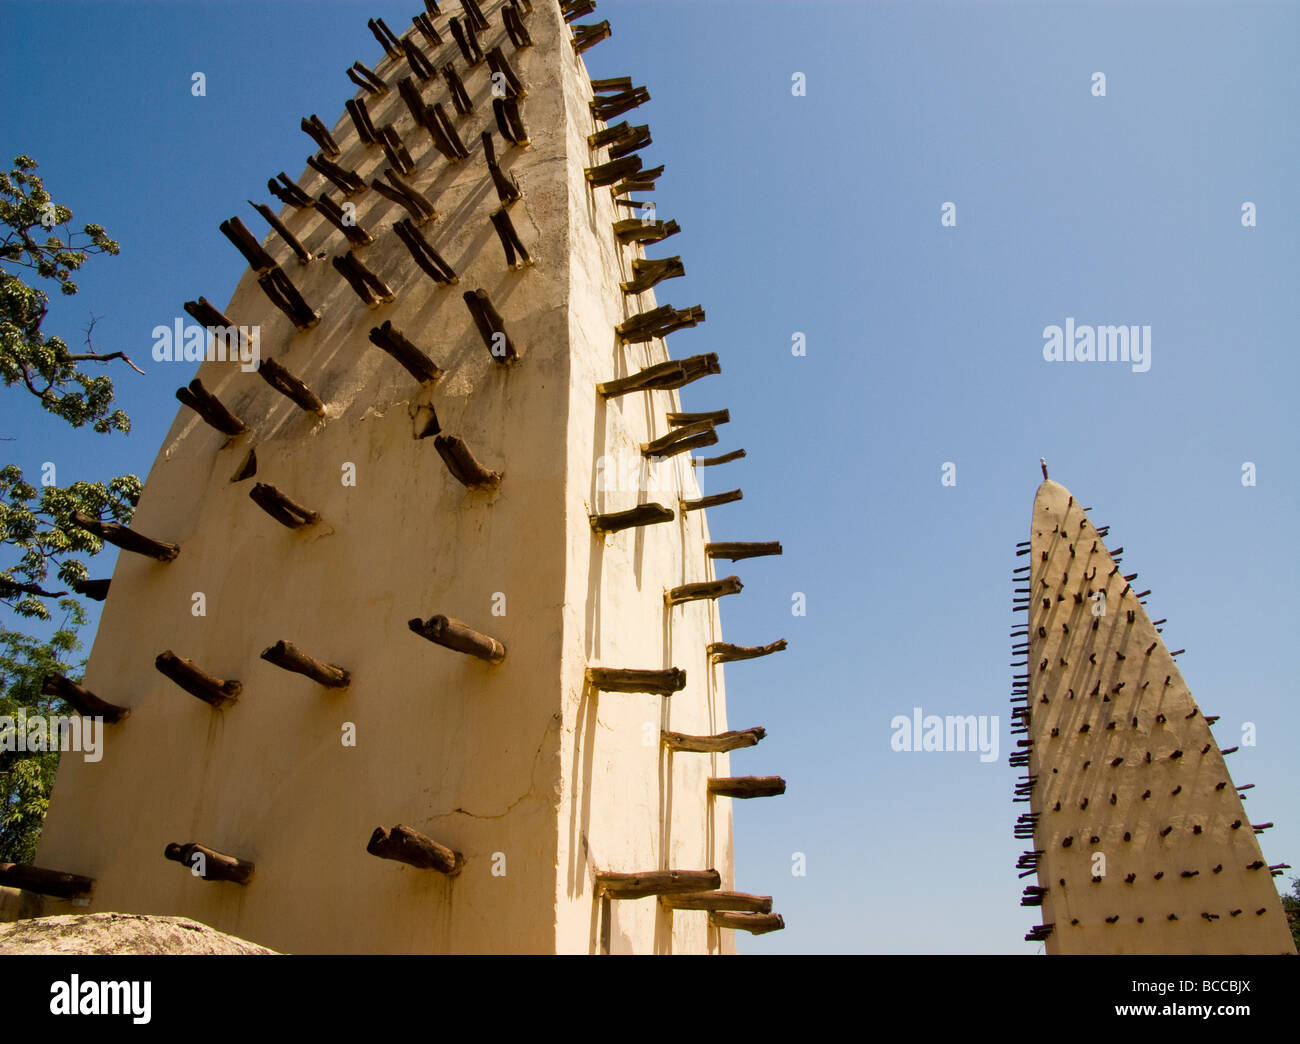 Burkina Faso. Sahel. Great mosque of Bobo-Dioulasso. Sudanese style architecture built in adobe. Stock Photo